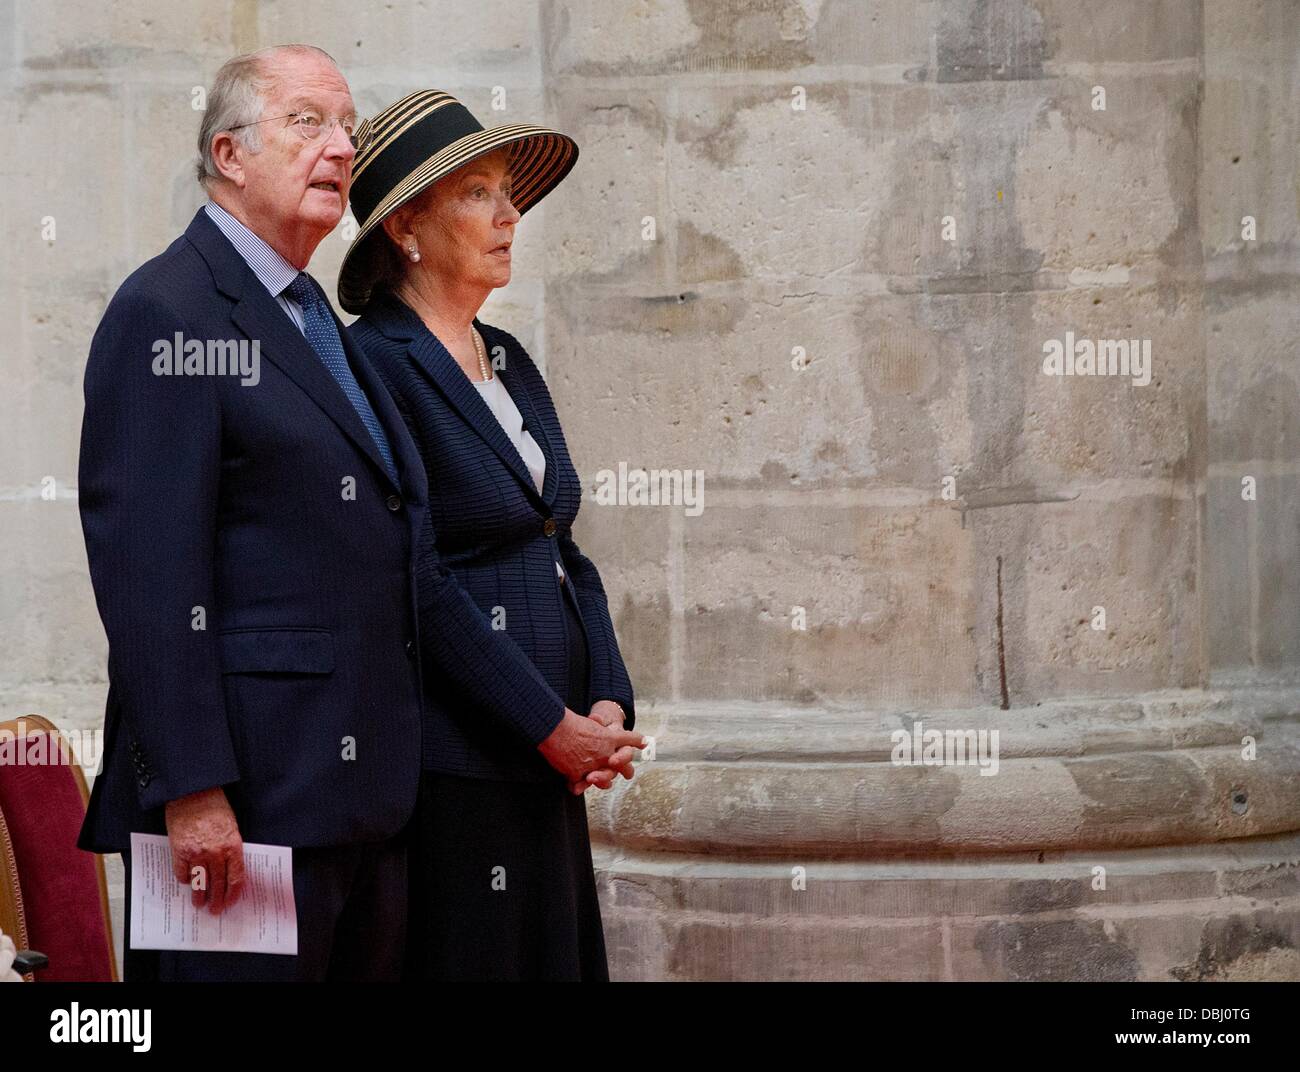 Brussels, Belgium. 31st July, 2013. King Albert and Queen Paola of Belgium attend the mass to commemorate the death of King Baudouin 20 years ago at the Cathedral in Brussels, Belgium, 31 July 2013. Photo: Patrick van Katwijk/dpa/Alamy Live News Stock Photo